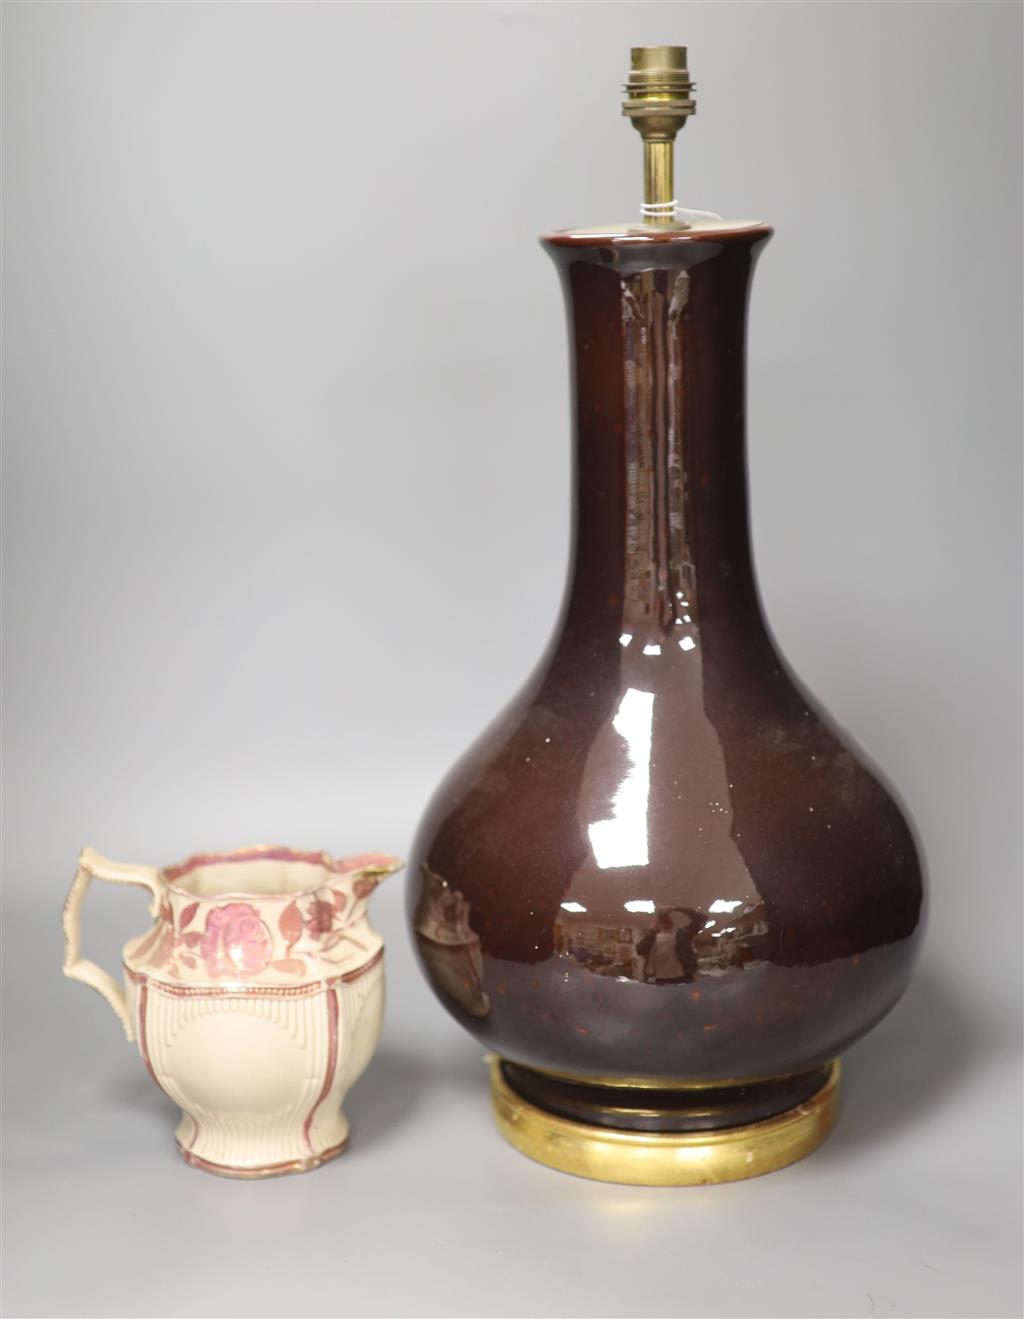 A sang de boeuf lamp base, 41cm high including stand and a pink lustre jug